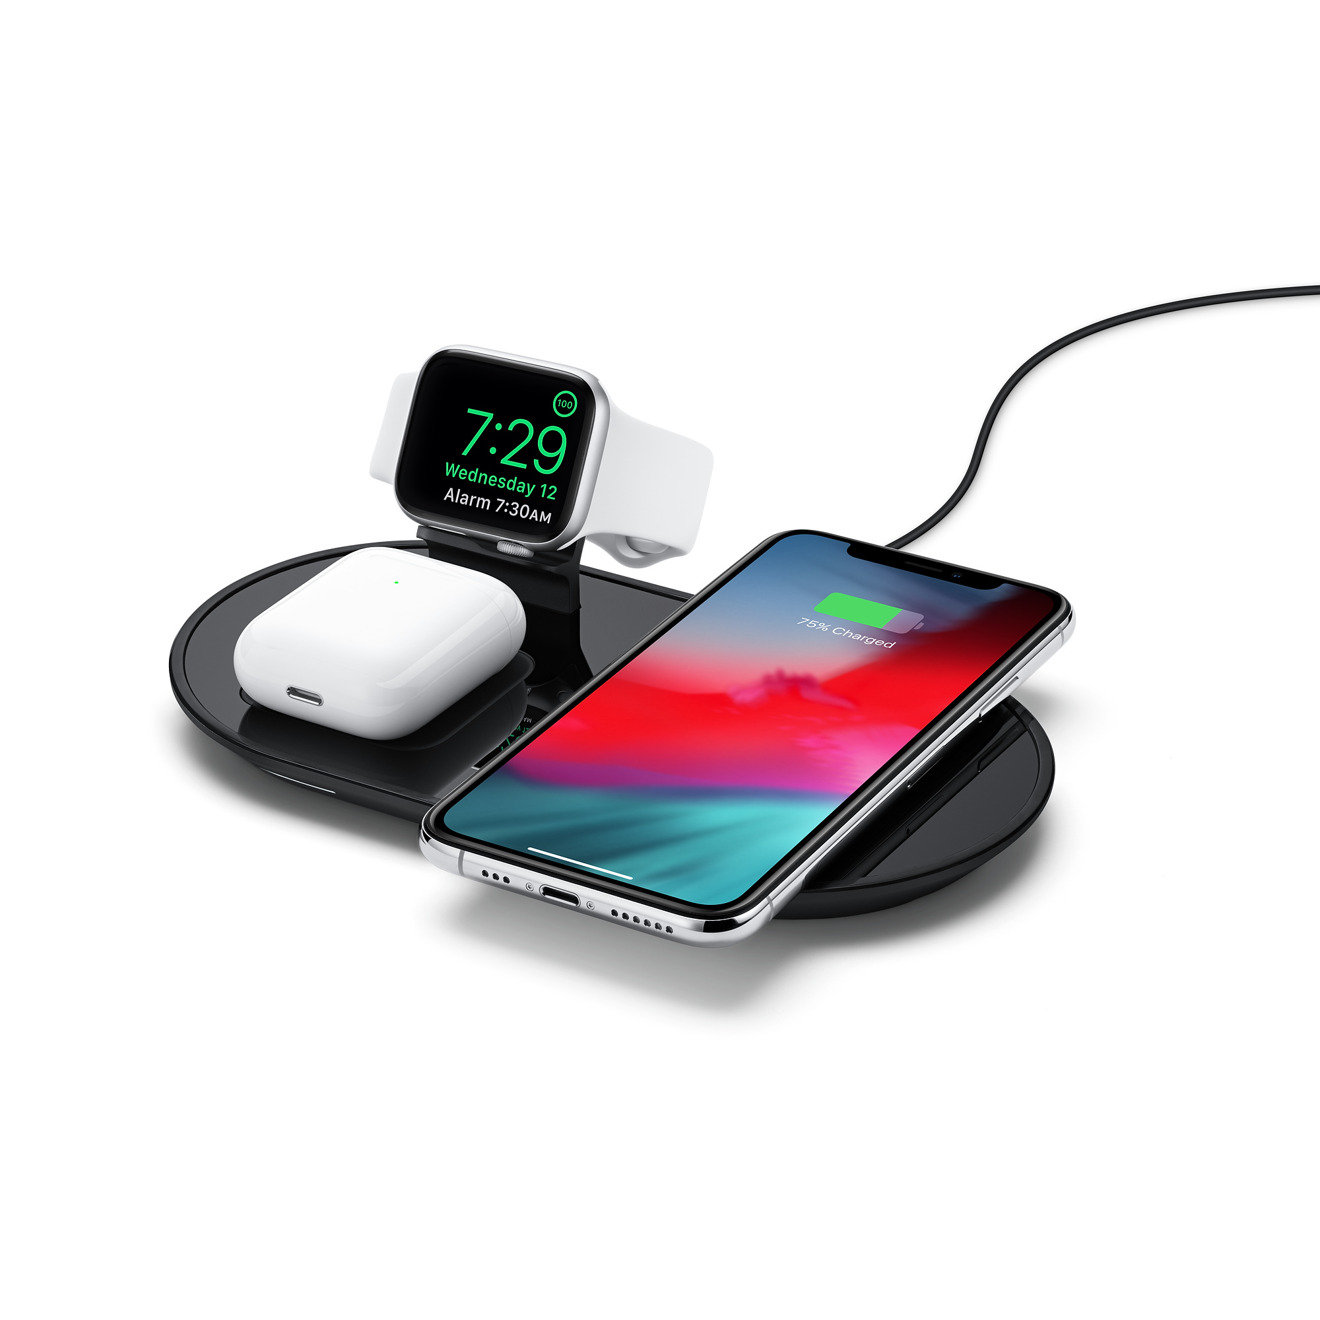 Mophie's new 3-in-1 wireless charger